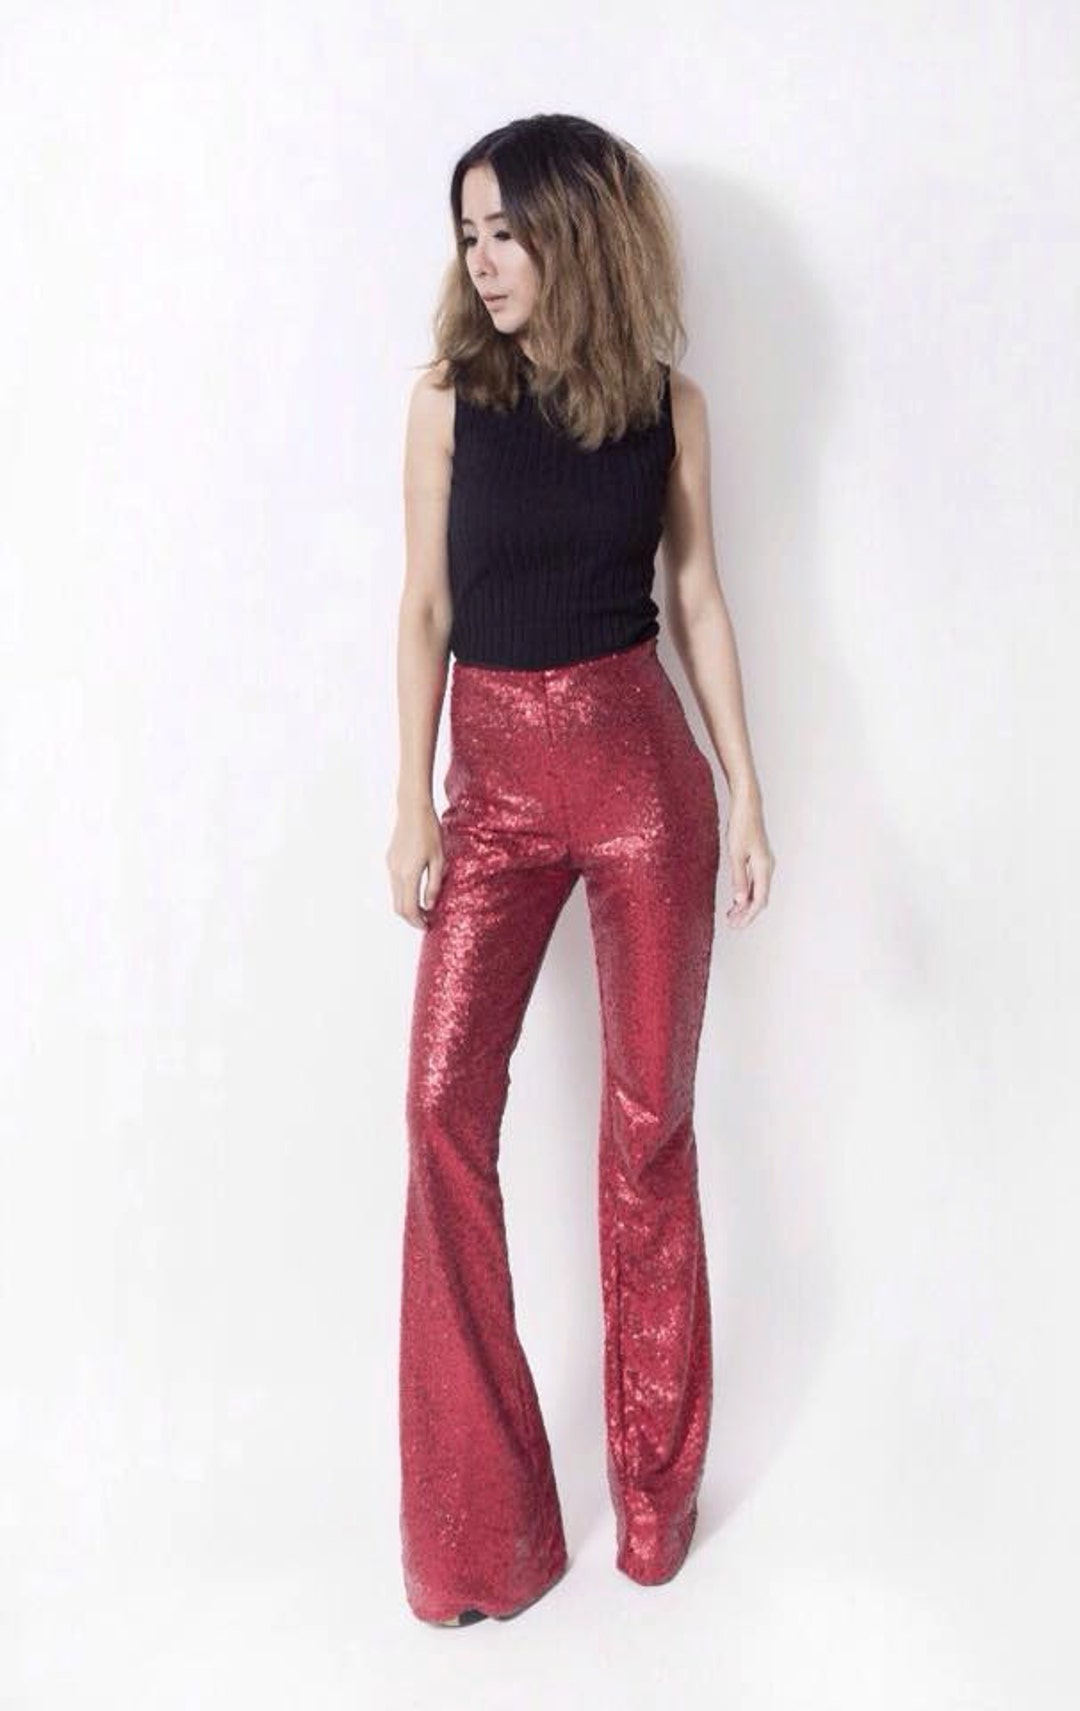 Super High Waisted Sequin Flare Pant